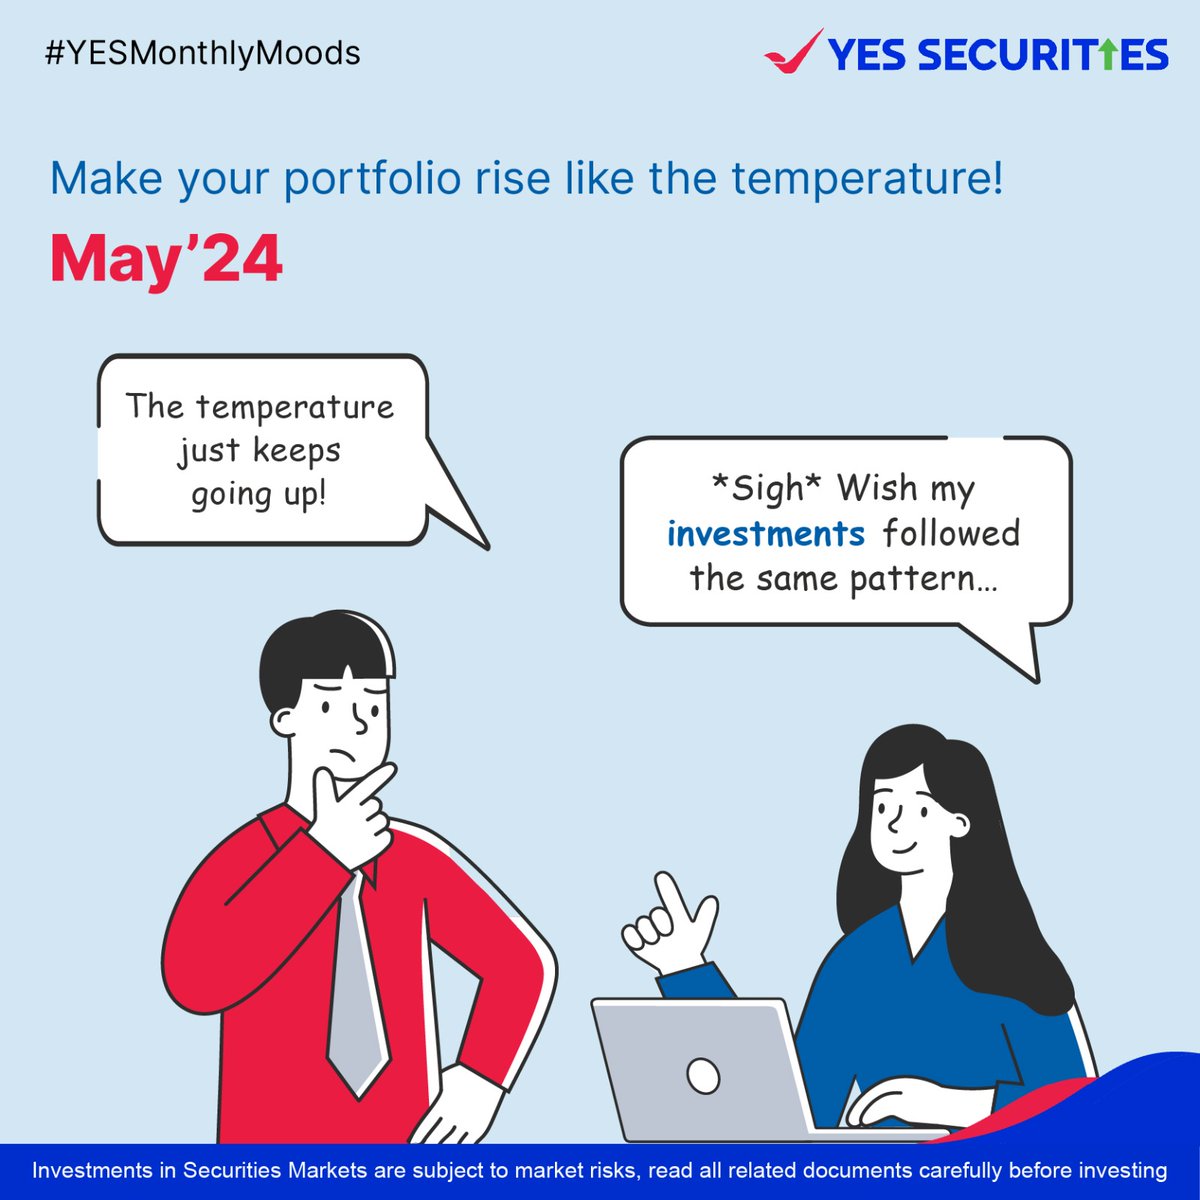 Fired up by the rising heat, our determination to invest is hotter than ever.🔥

Disclaimer: bit.ly/3DZqs3K

#YESSECURITIES #ChoiceoftheWize #YesMonthlyMoods #may #finance #summer